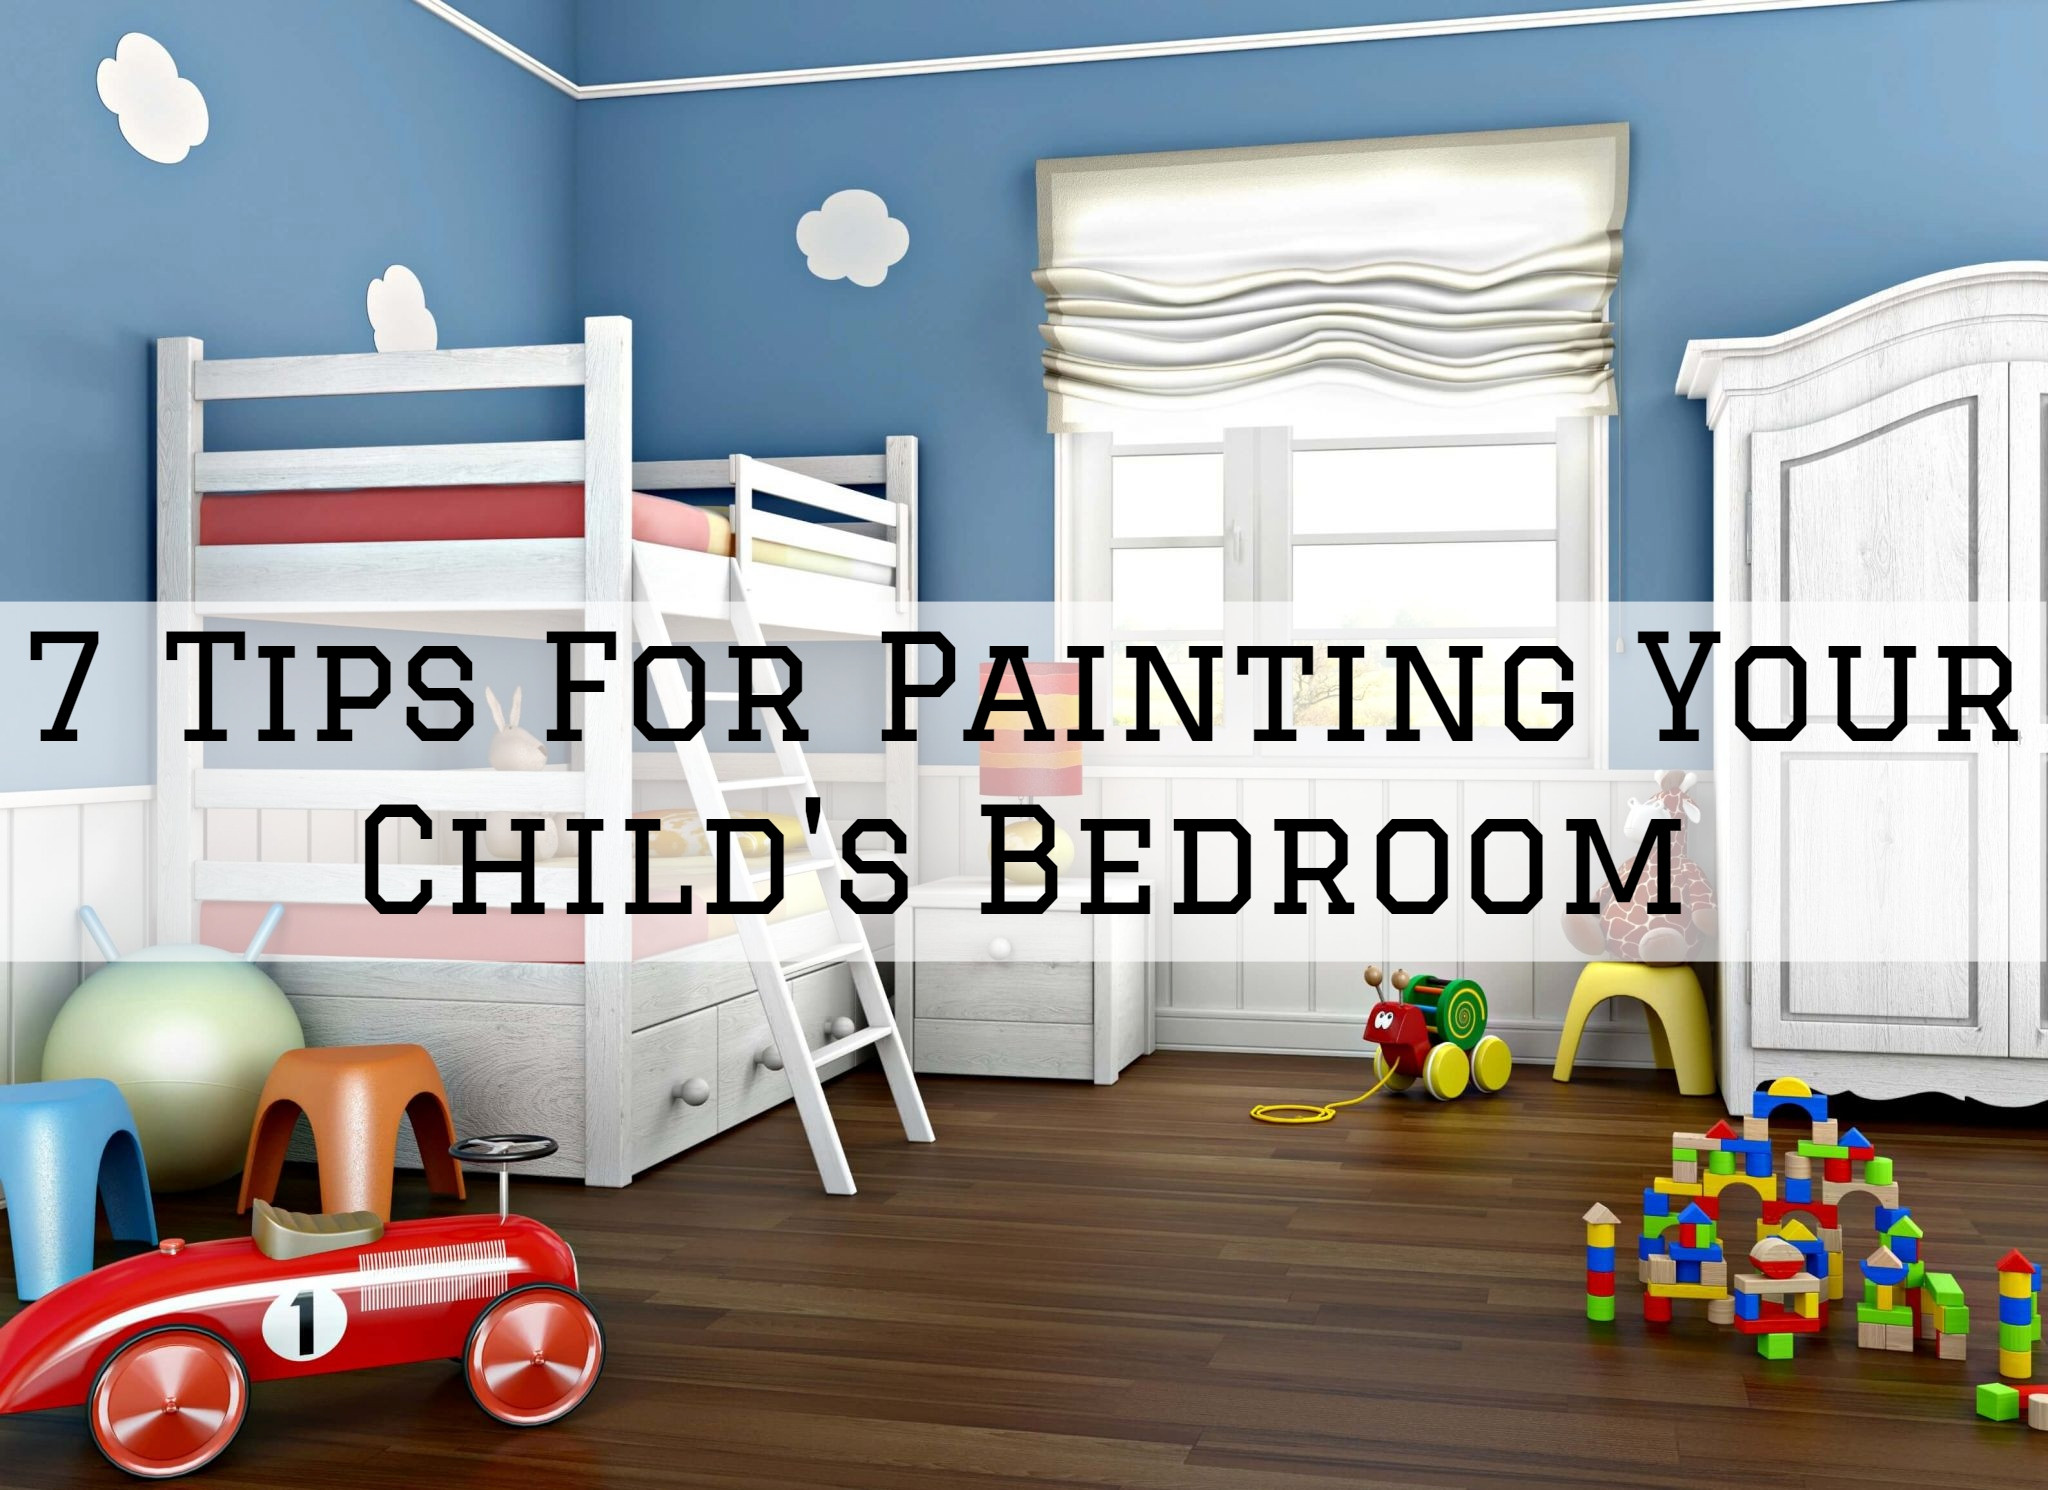 21-07-2021 Steves Quality Painting And Washing Green Lake WI tips for painting your child's bedroom